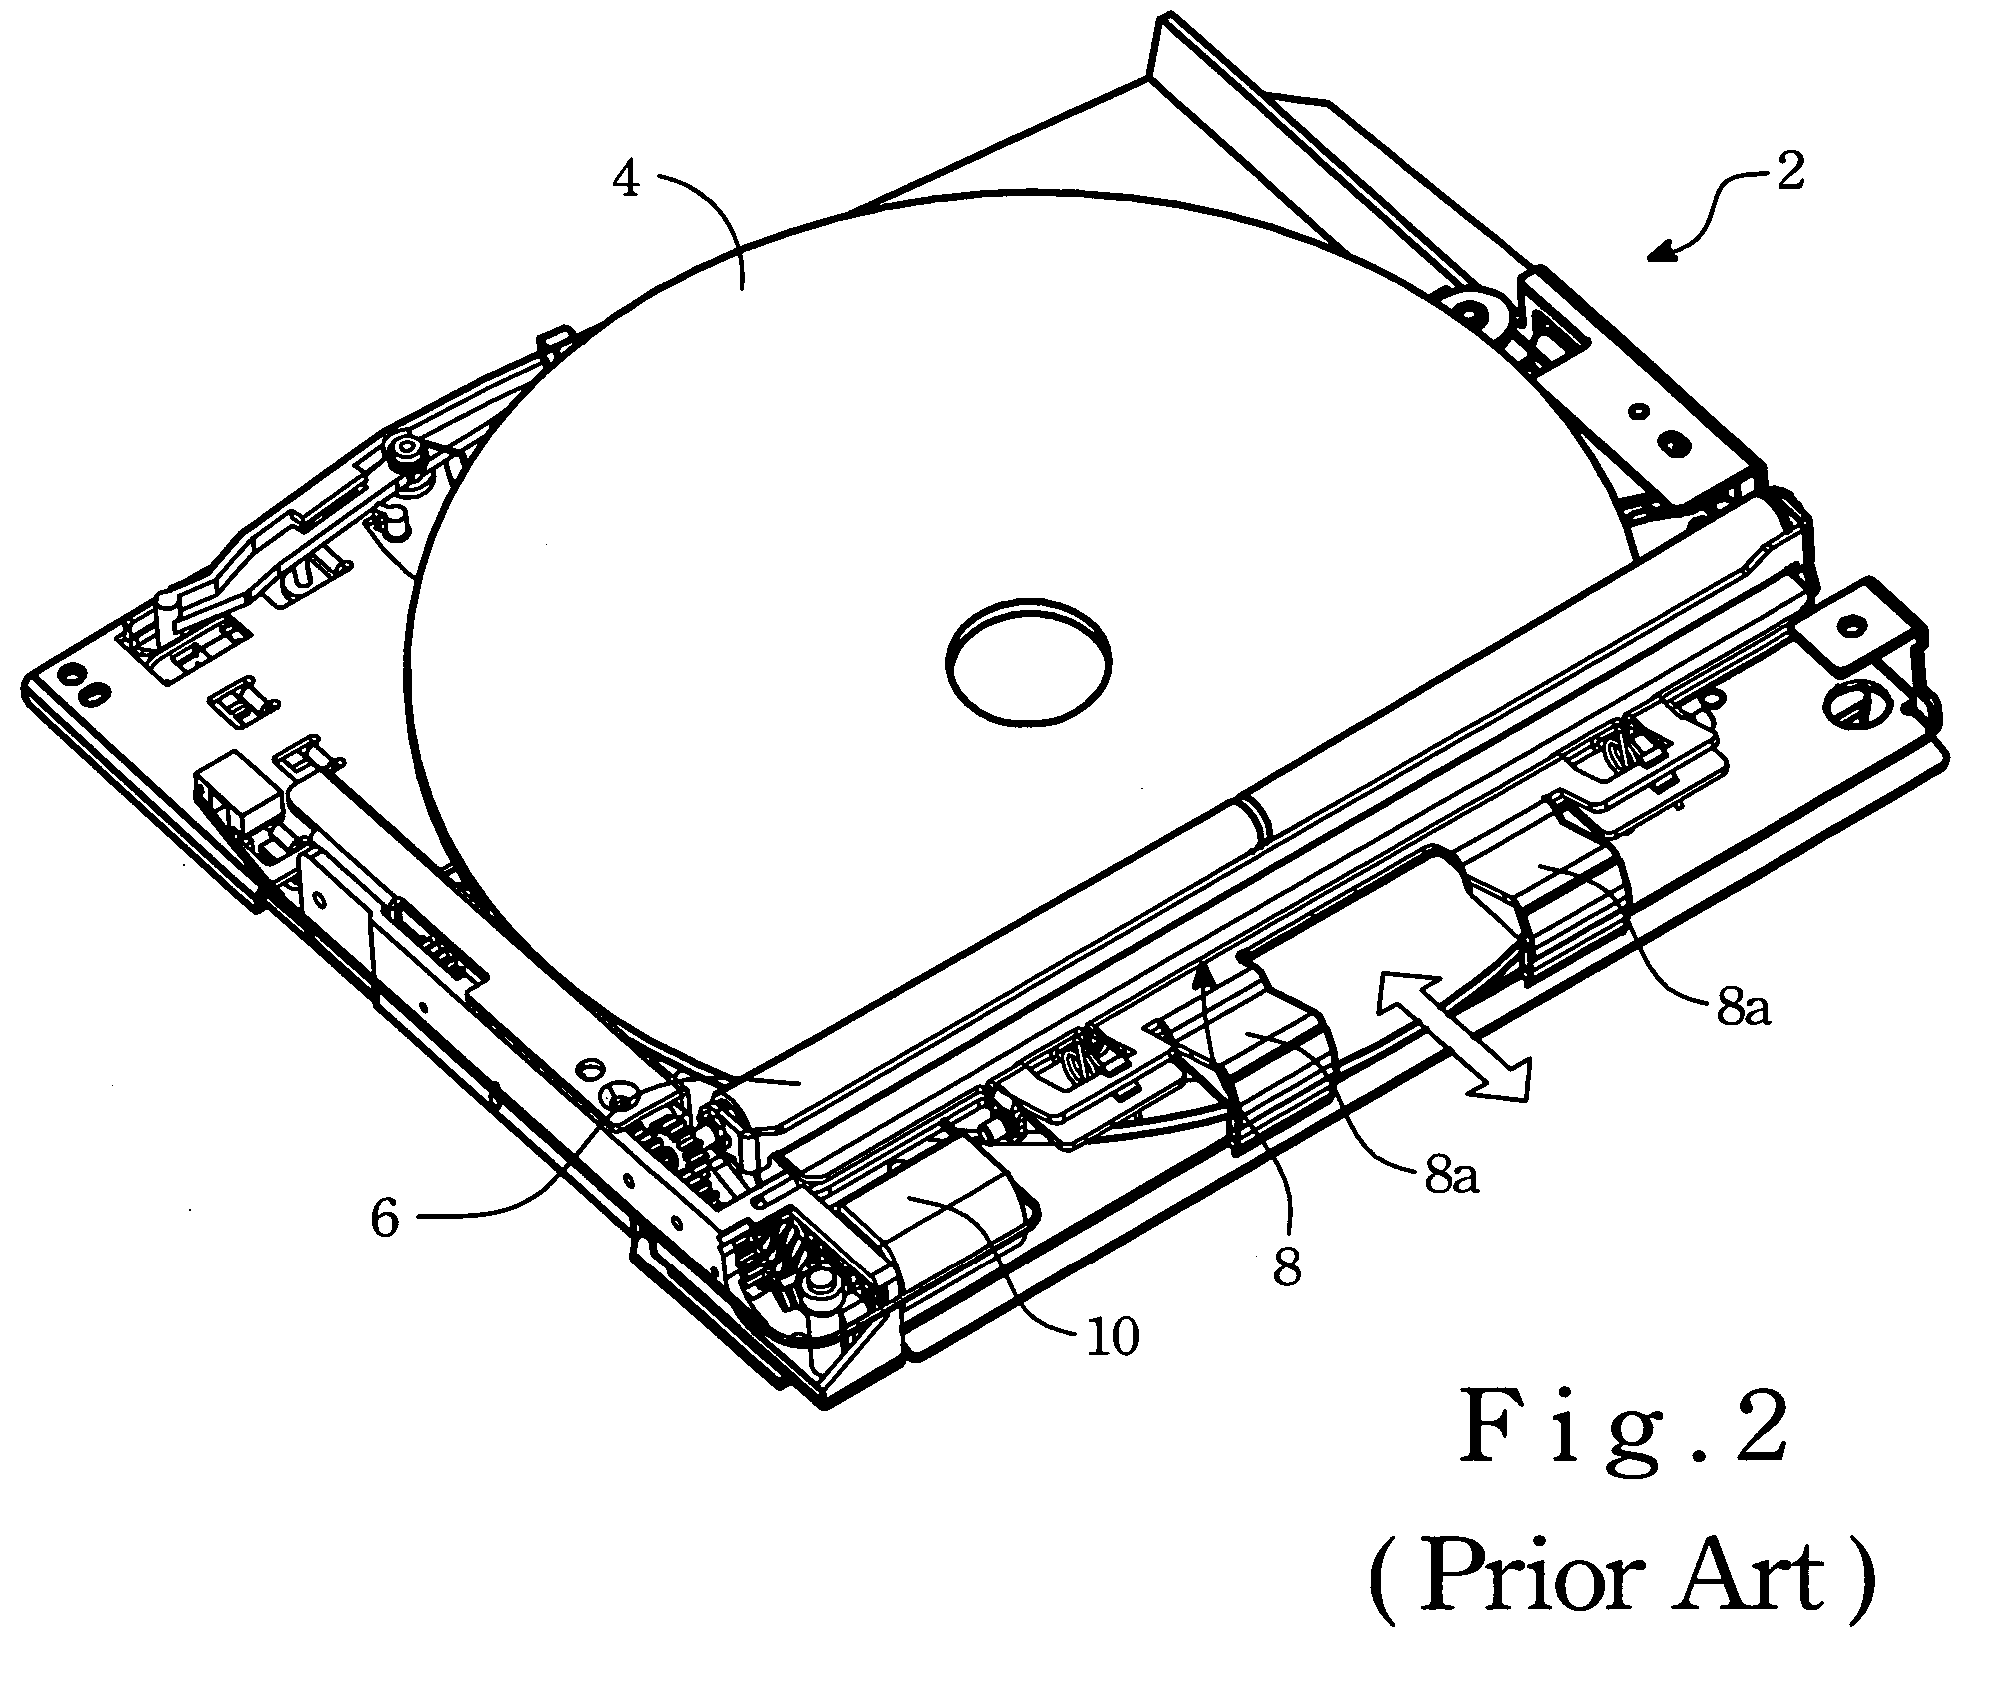 Slot-in optical reproducing apparatus with a visualized indicator